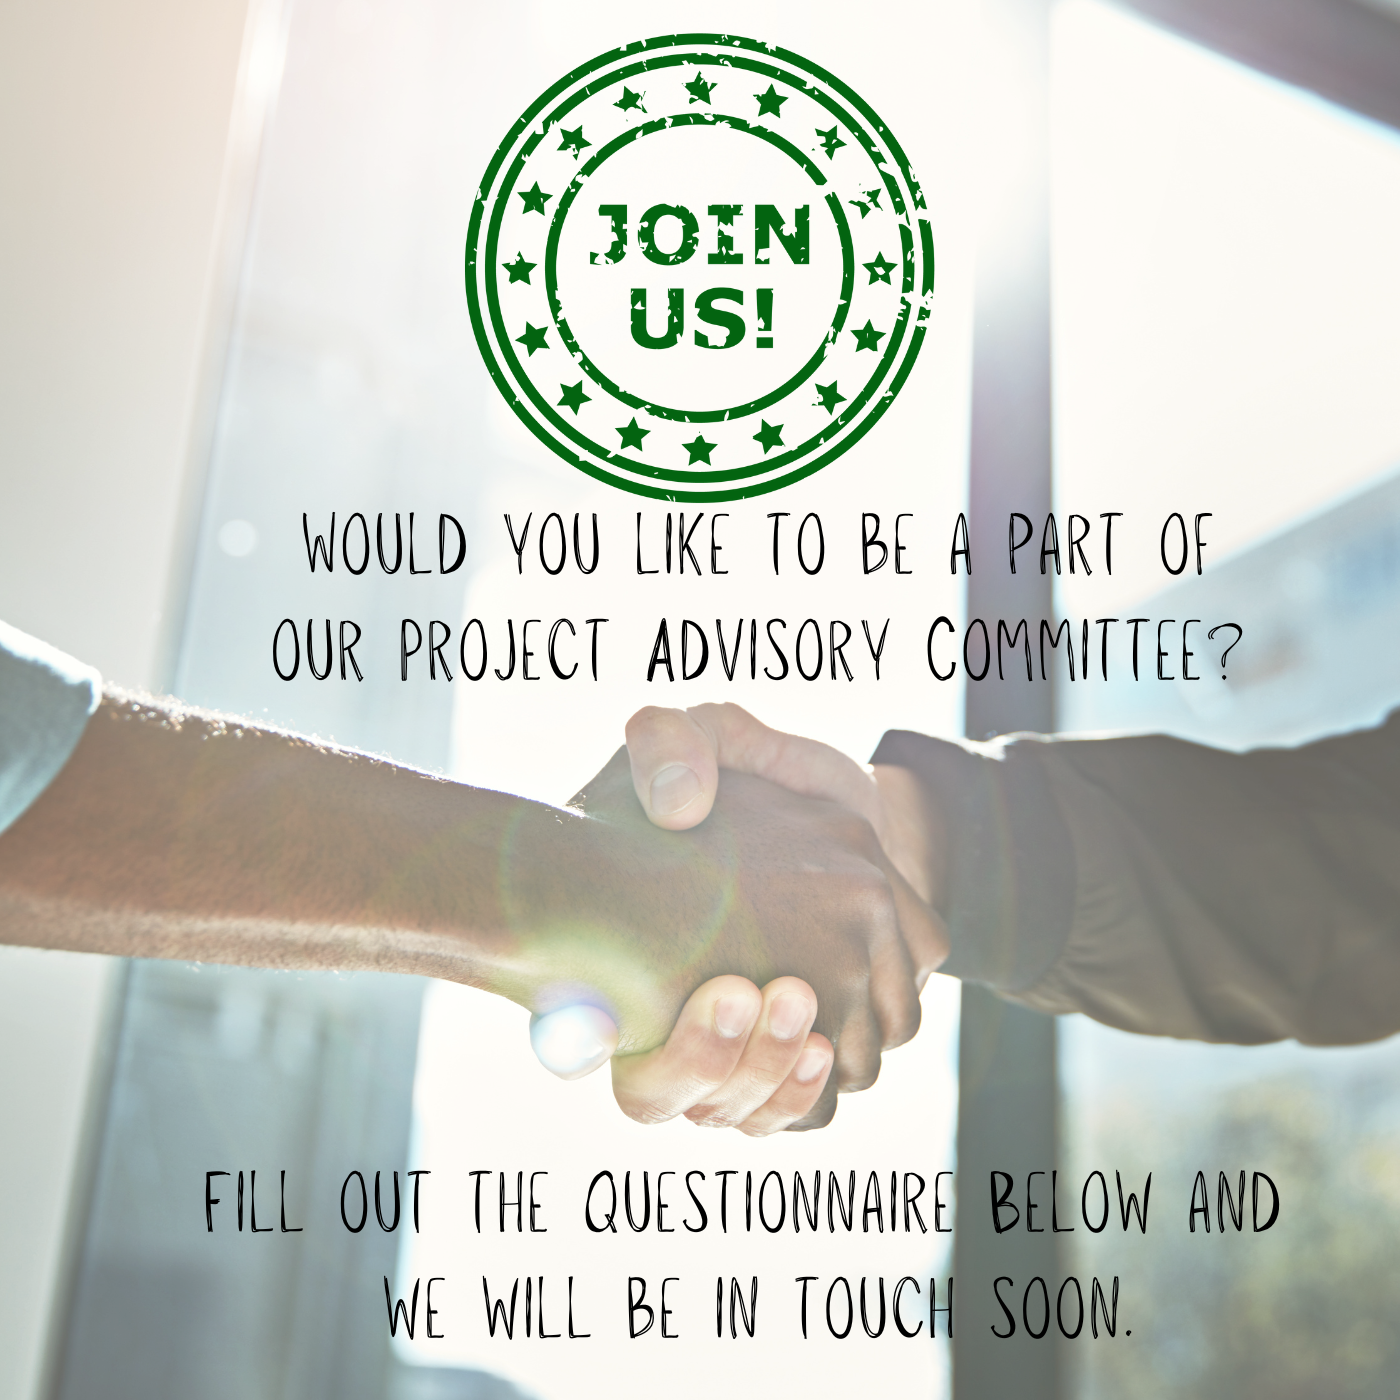 Handshake with text inviting you to join the project advisory committee